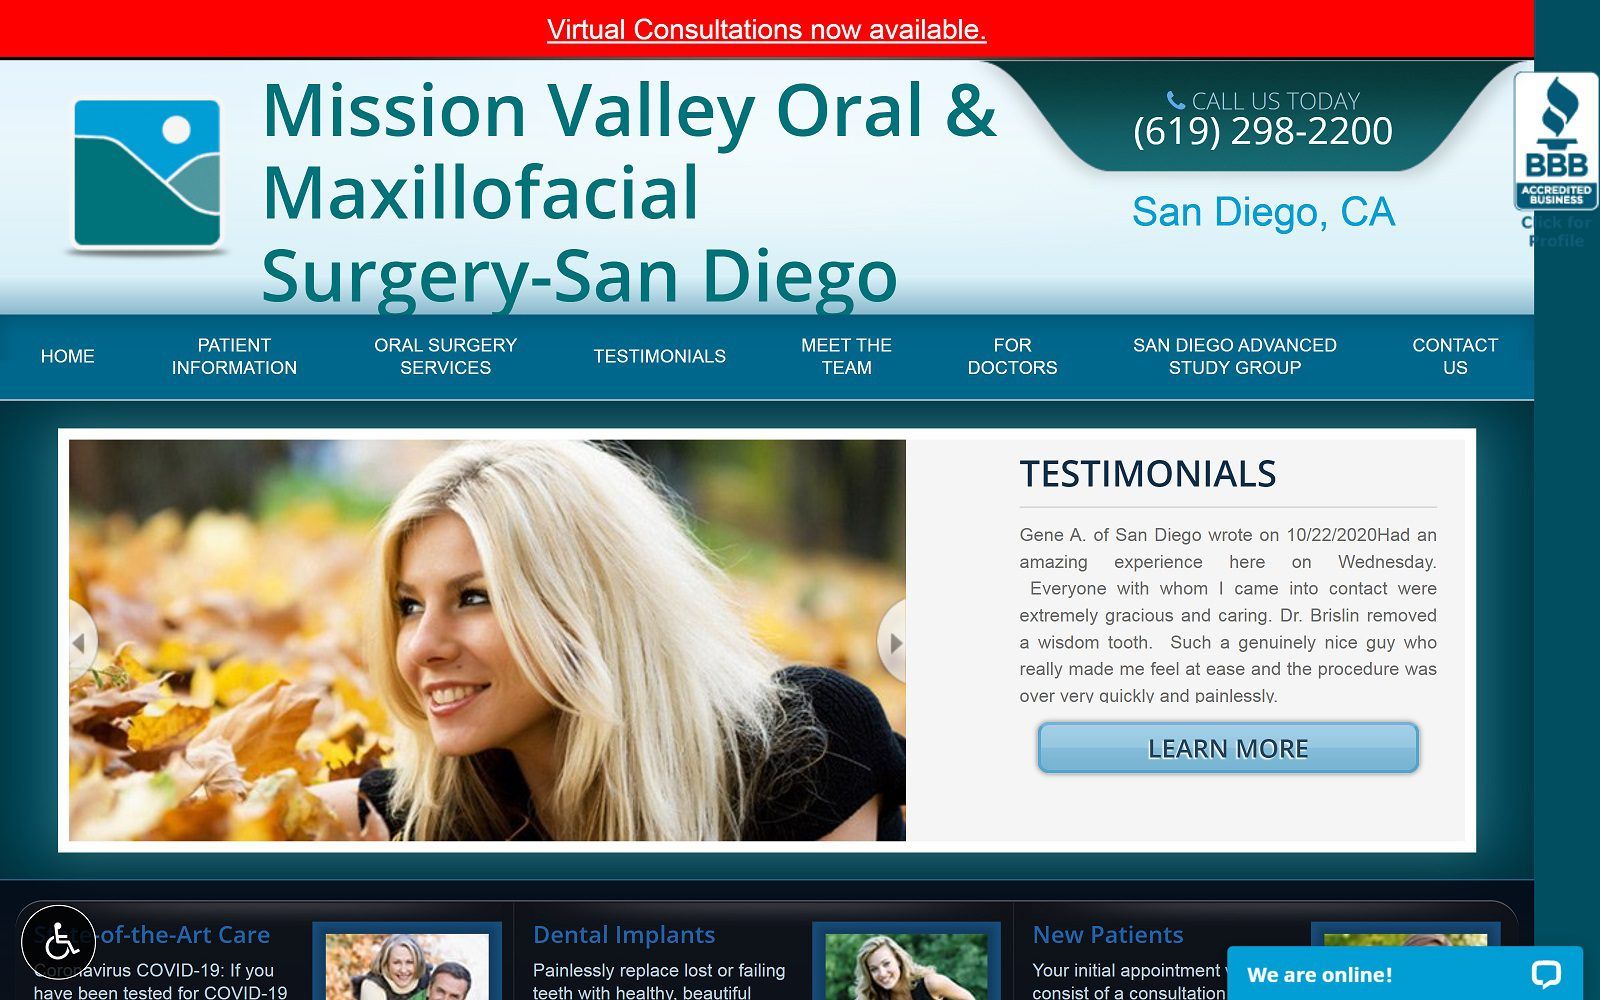 The screenshot of mission valley oral & maxillofacial surgery, inc. Website